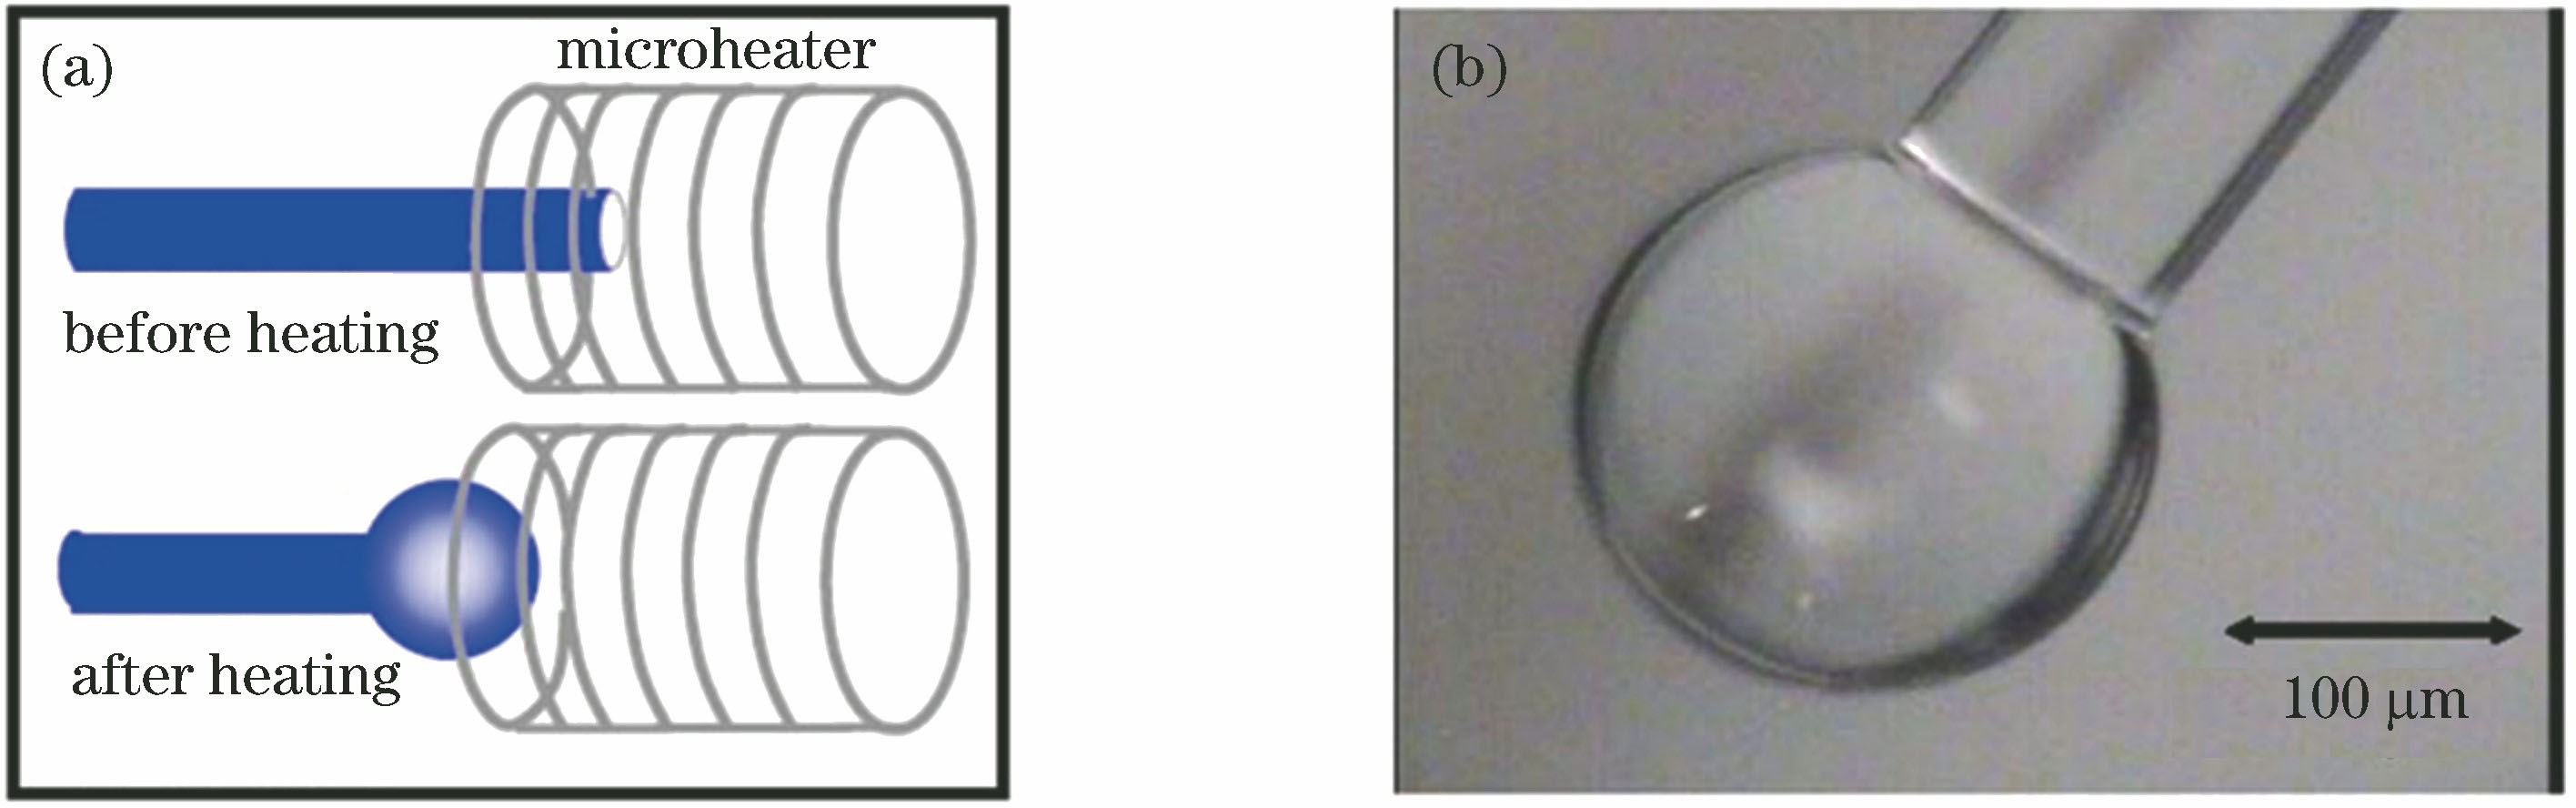 Fabrication process of microsphere. (a) Diagram of the microsphere fabrication process; (b) microsphere cavity prepared by ZBLAN fiber (the picture is processed optimization)